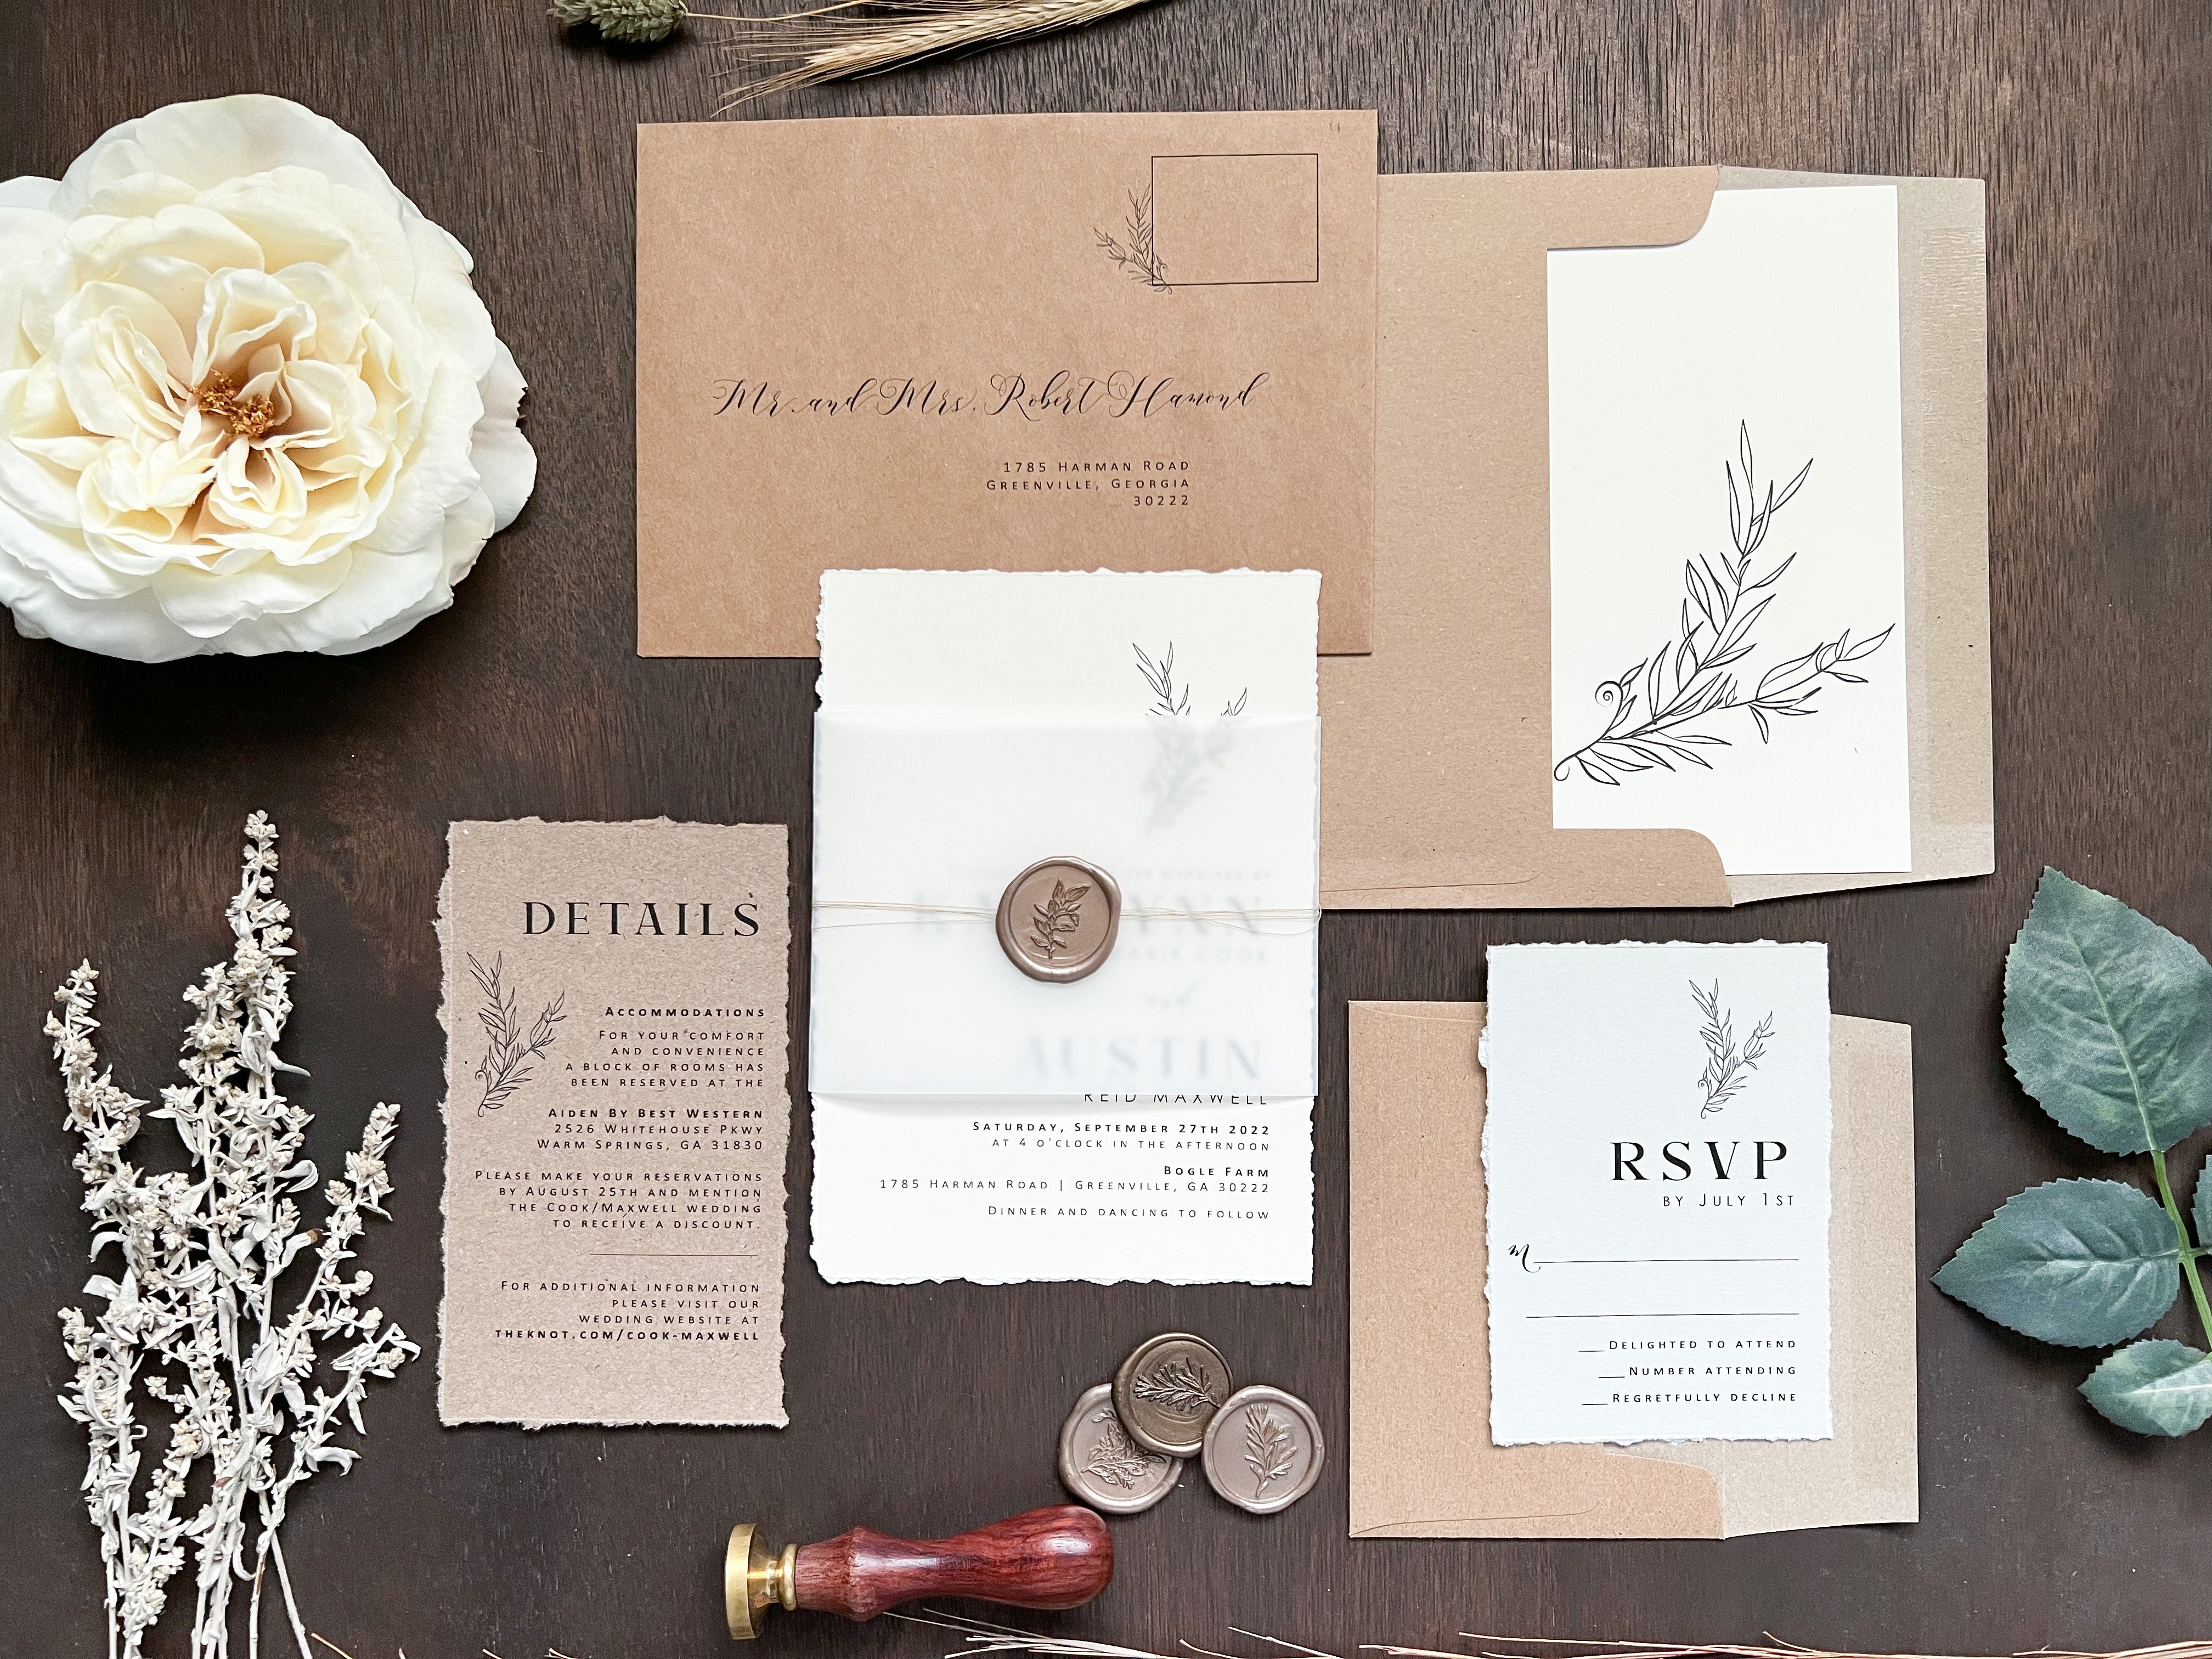 Contemporary Boho Wedding Invitation with Deckled Edging, Vellum Belly Band and Wax Seal